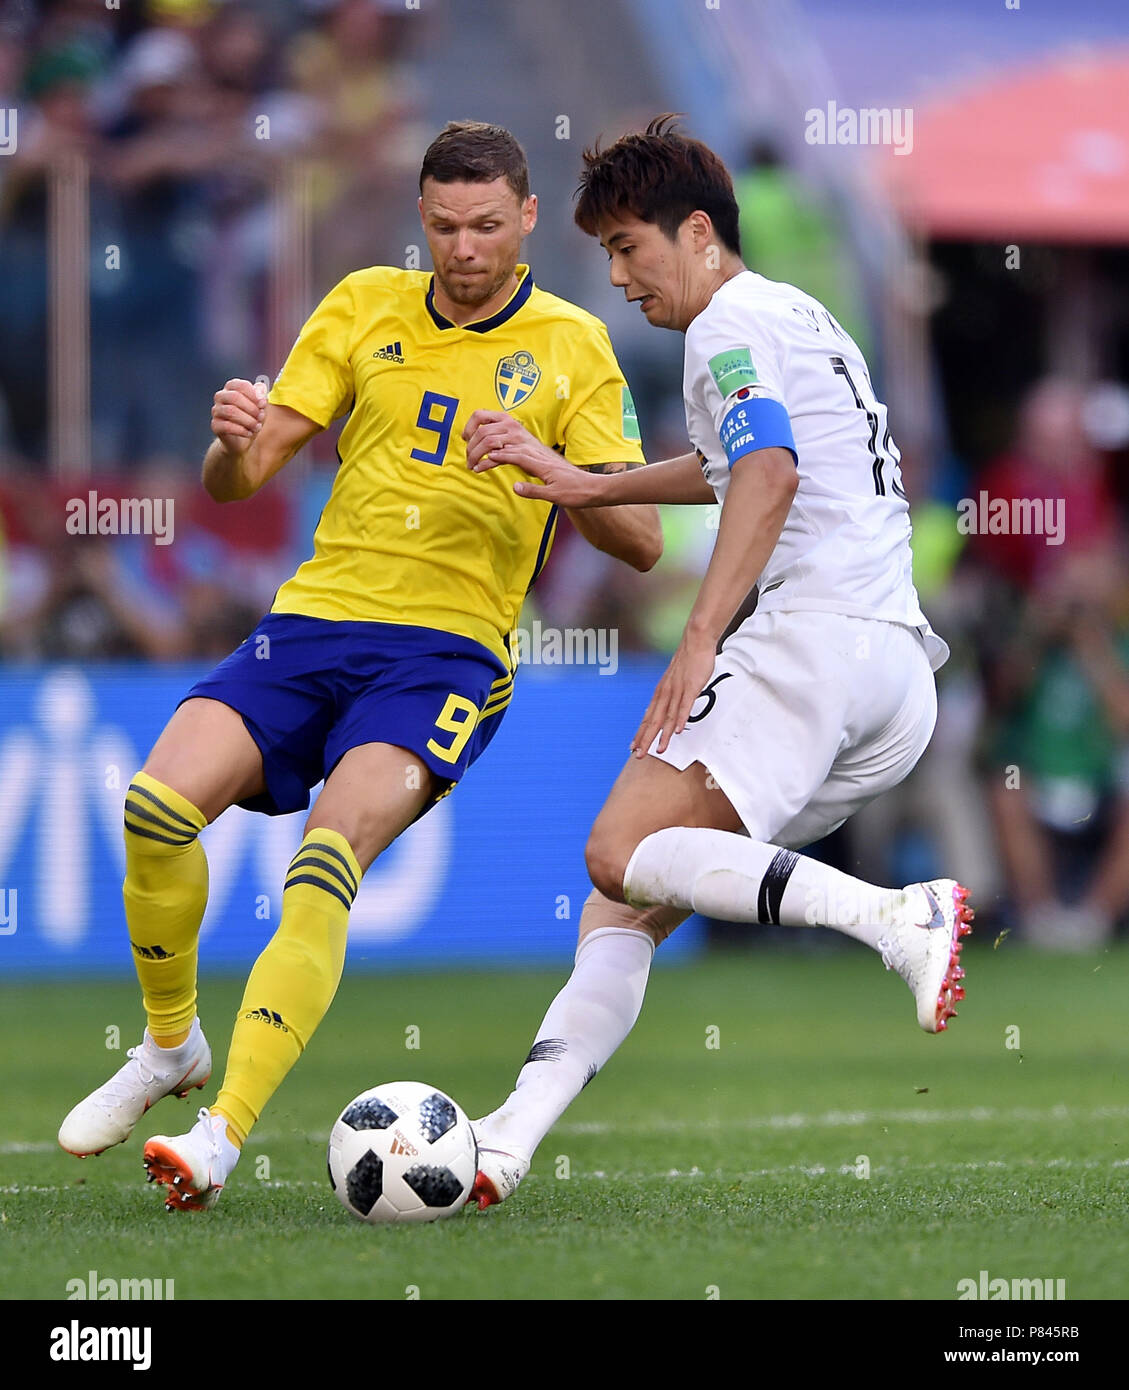 NIZHNIY NOVGOROD, RUSSIA - JUNE 18: Marcus Berg of Sweden competes with Sungyueng Ki of Korea Republic during the 2018 FIFA World Cup Russia group F match between Sweden and Korea Republic at Nizhniy Novgorod Stadium on June 18, 2018 in Nizhniy Novgorod, Russia. (Photo by Lukasz Laskowski/PressFocus/MB Media) Stock Photo